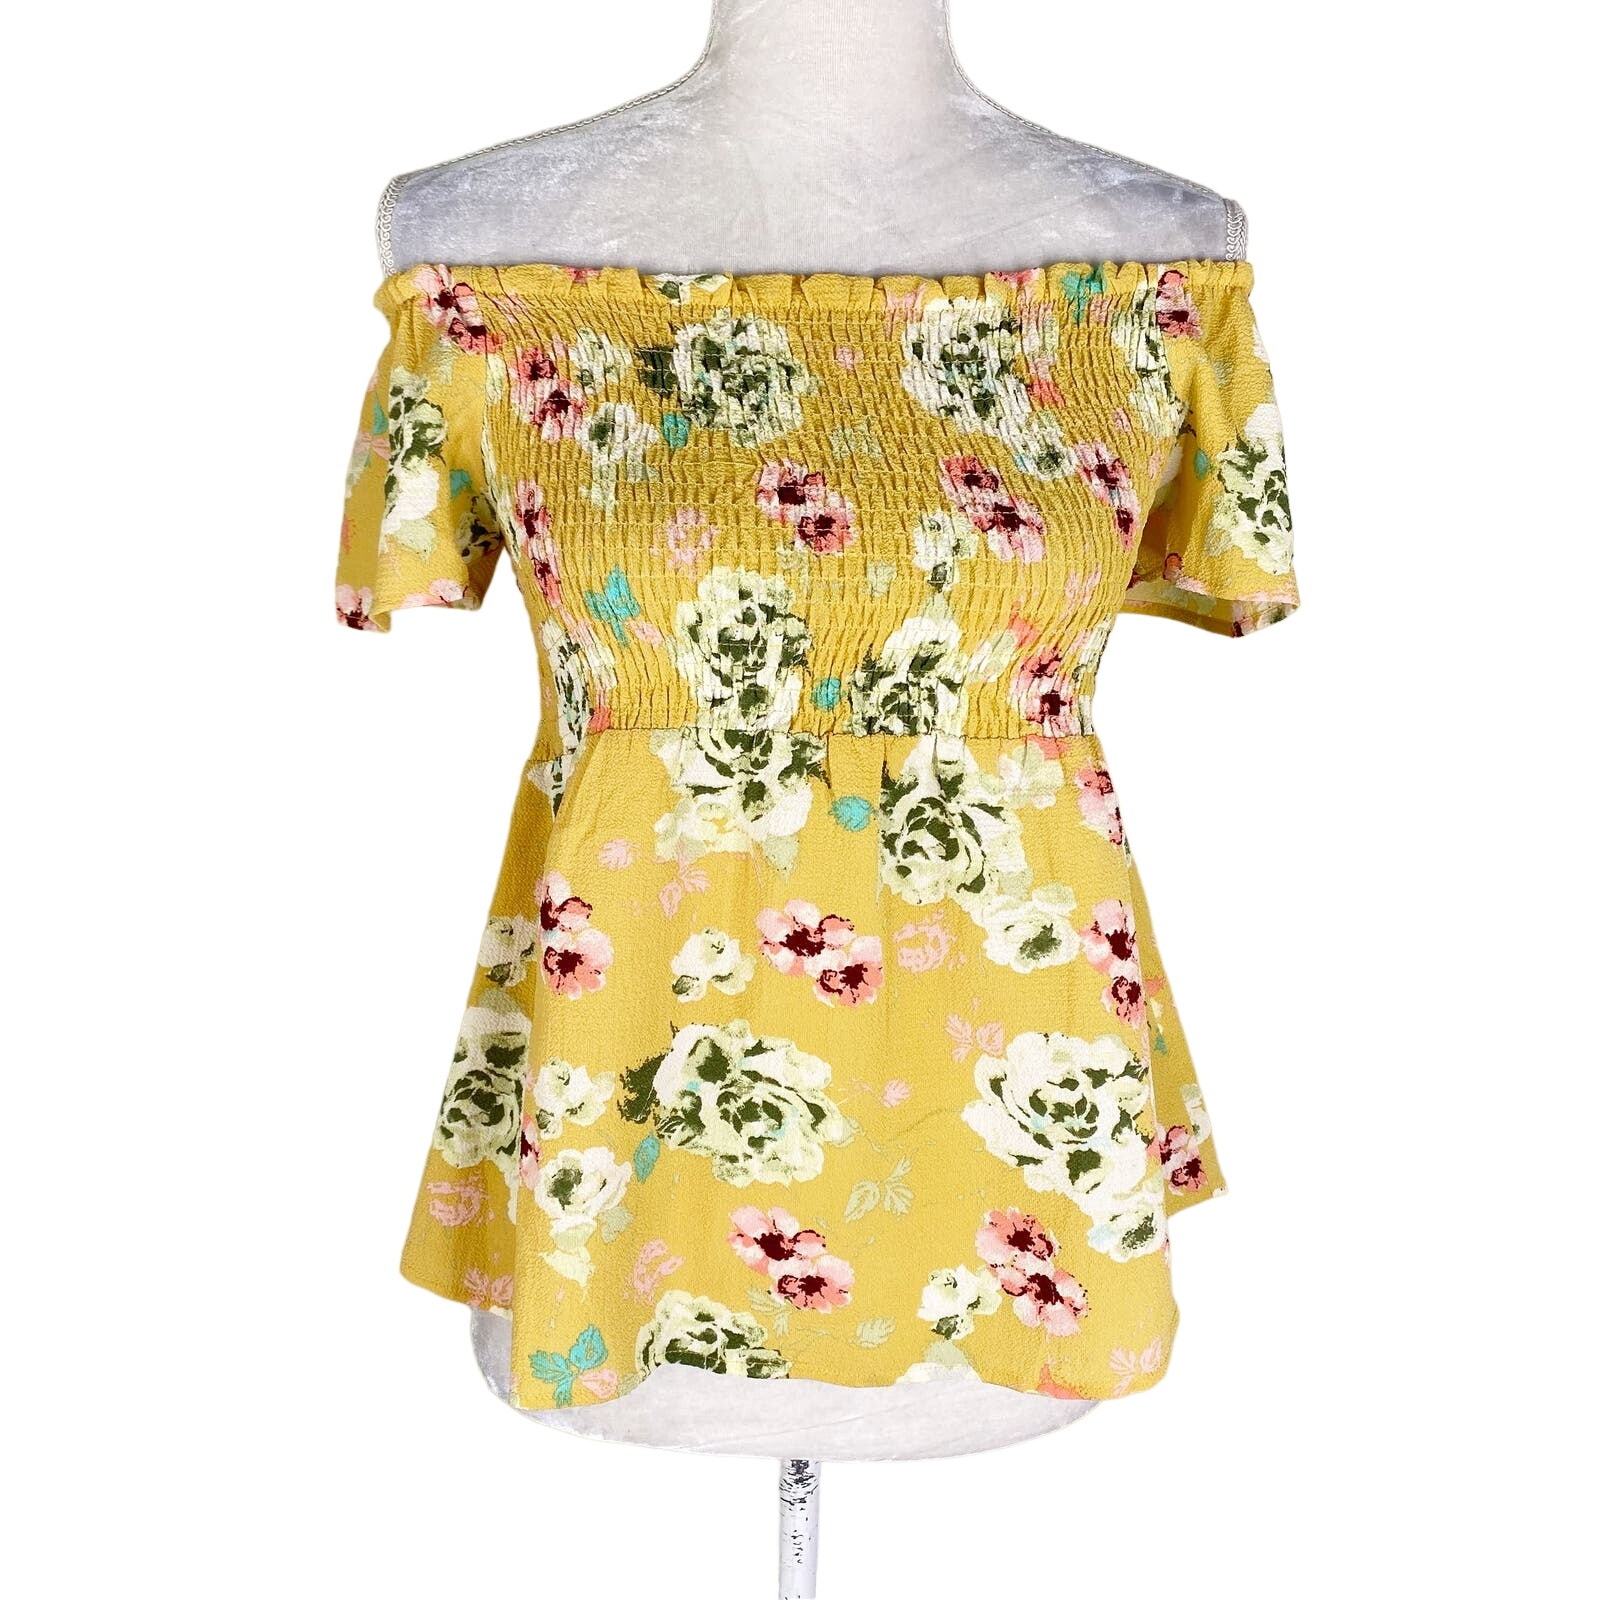 Primary image for Monteau Top L Yellow Floral Off Shoulders Short Sleeve New